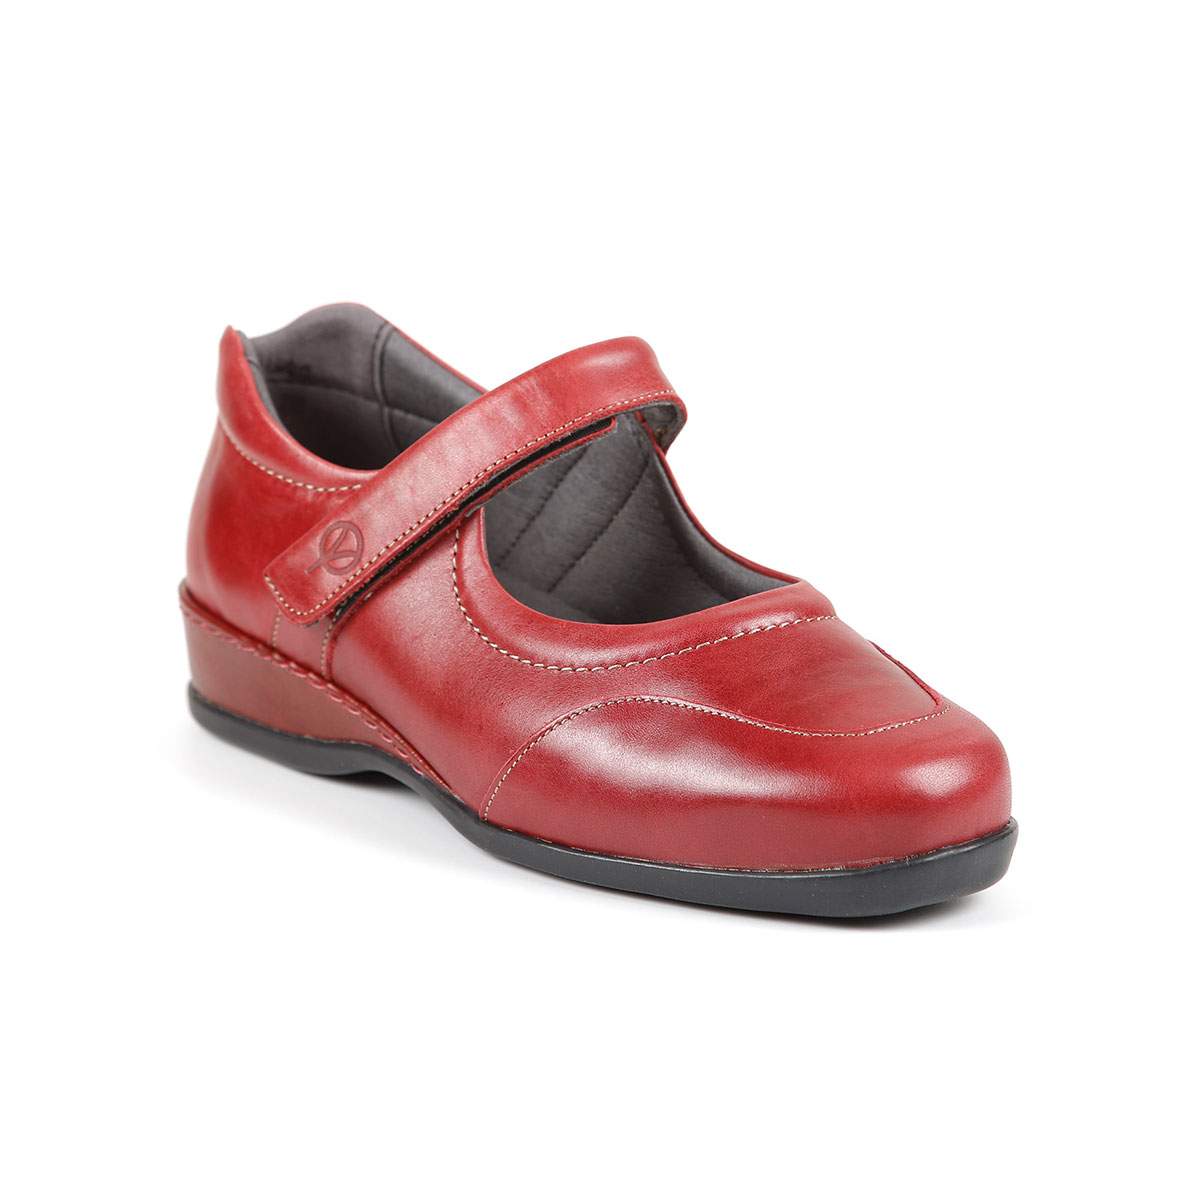 Red Welton shoe